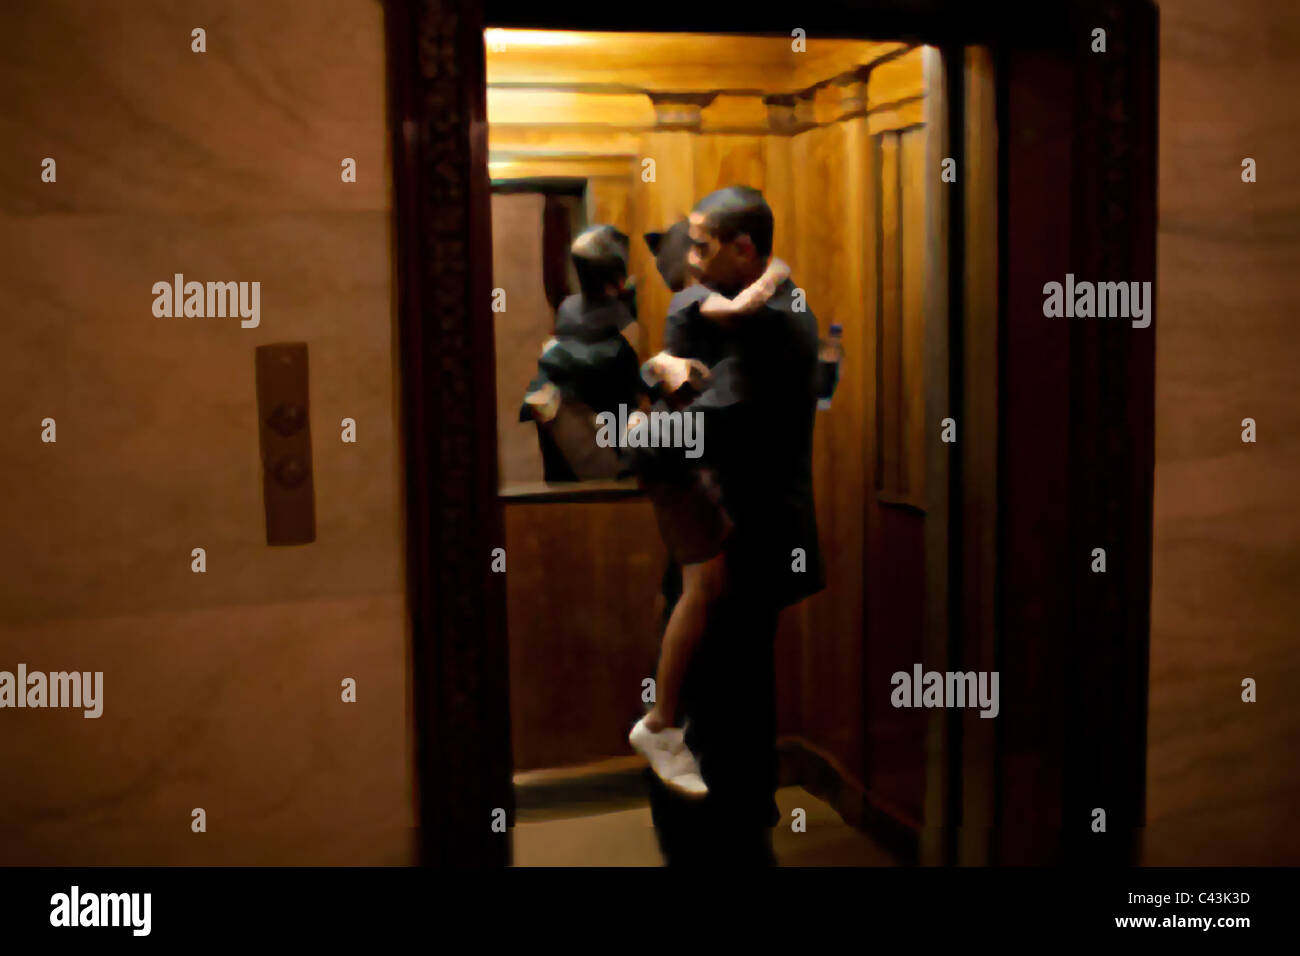 President Obama carries daughter Sasha in the elevator ready to head upstairs to the private residence at the White House Stock Photo